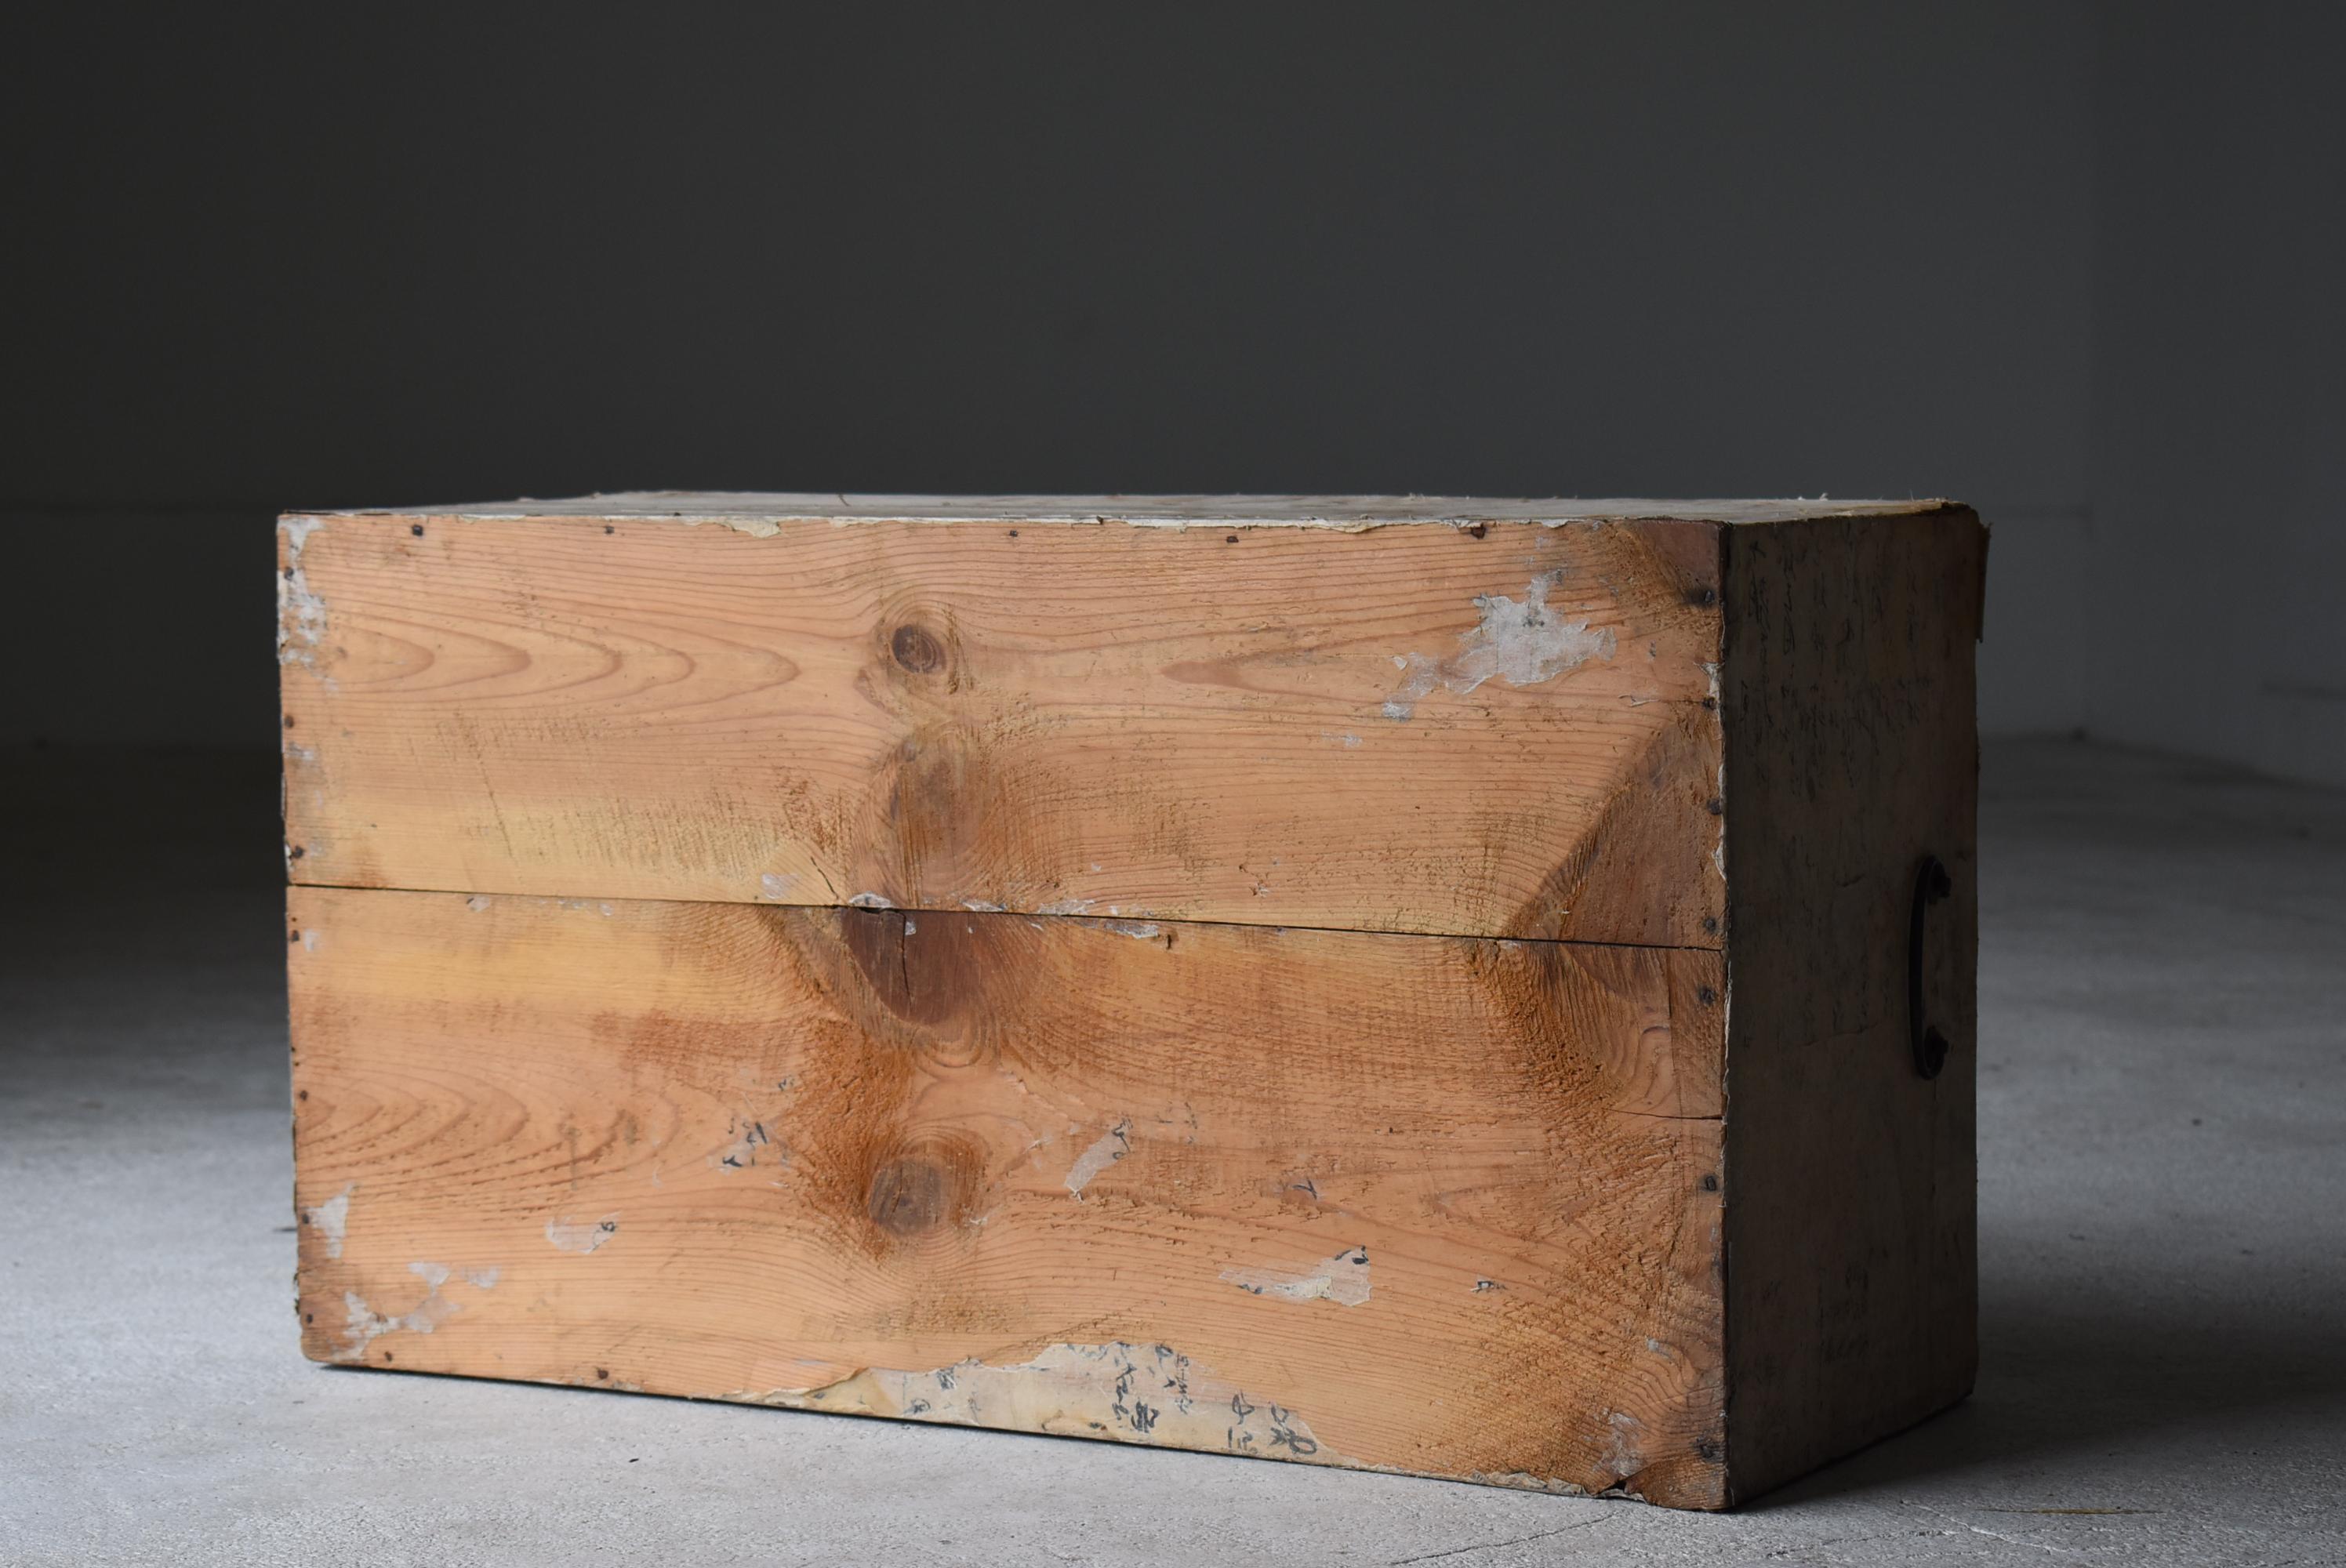 Japanese Antique Paper-Covered Wooden Box 1860s-1920s / Sofa Table Wabi Sabi 6